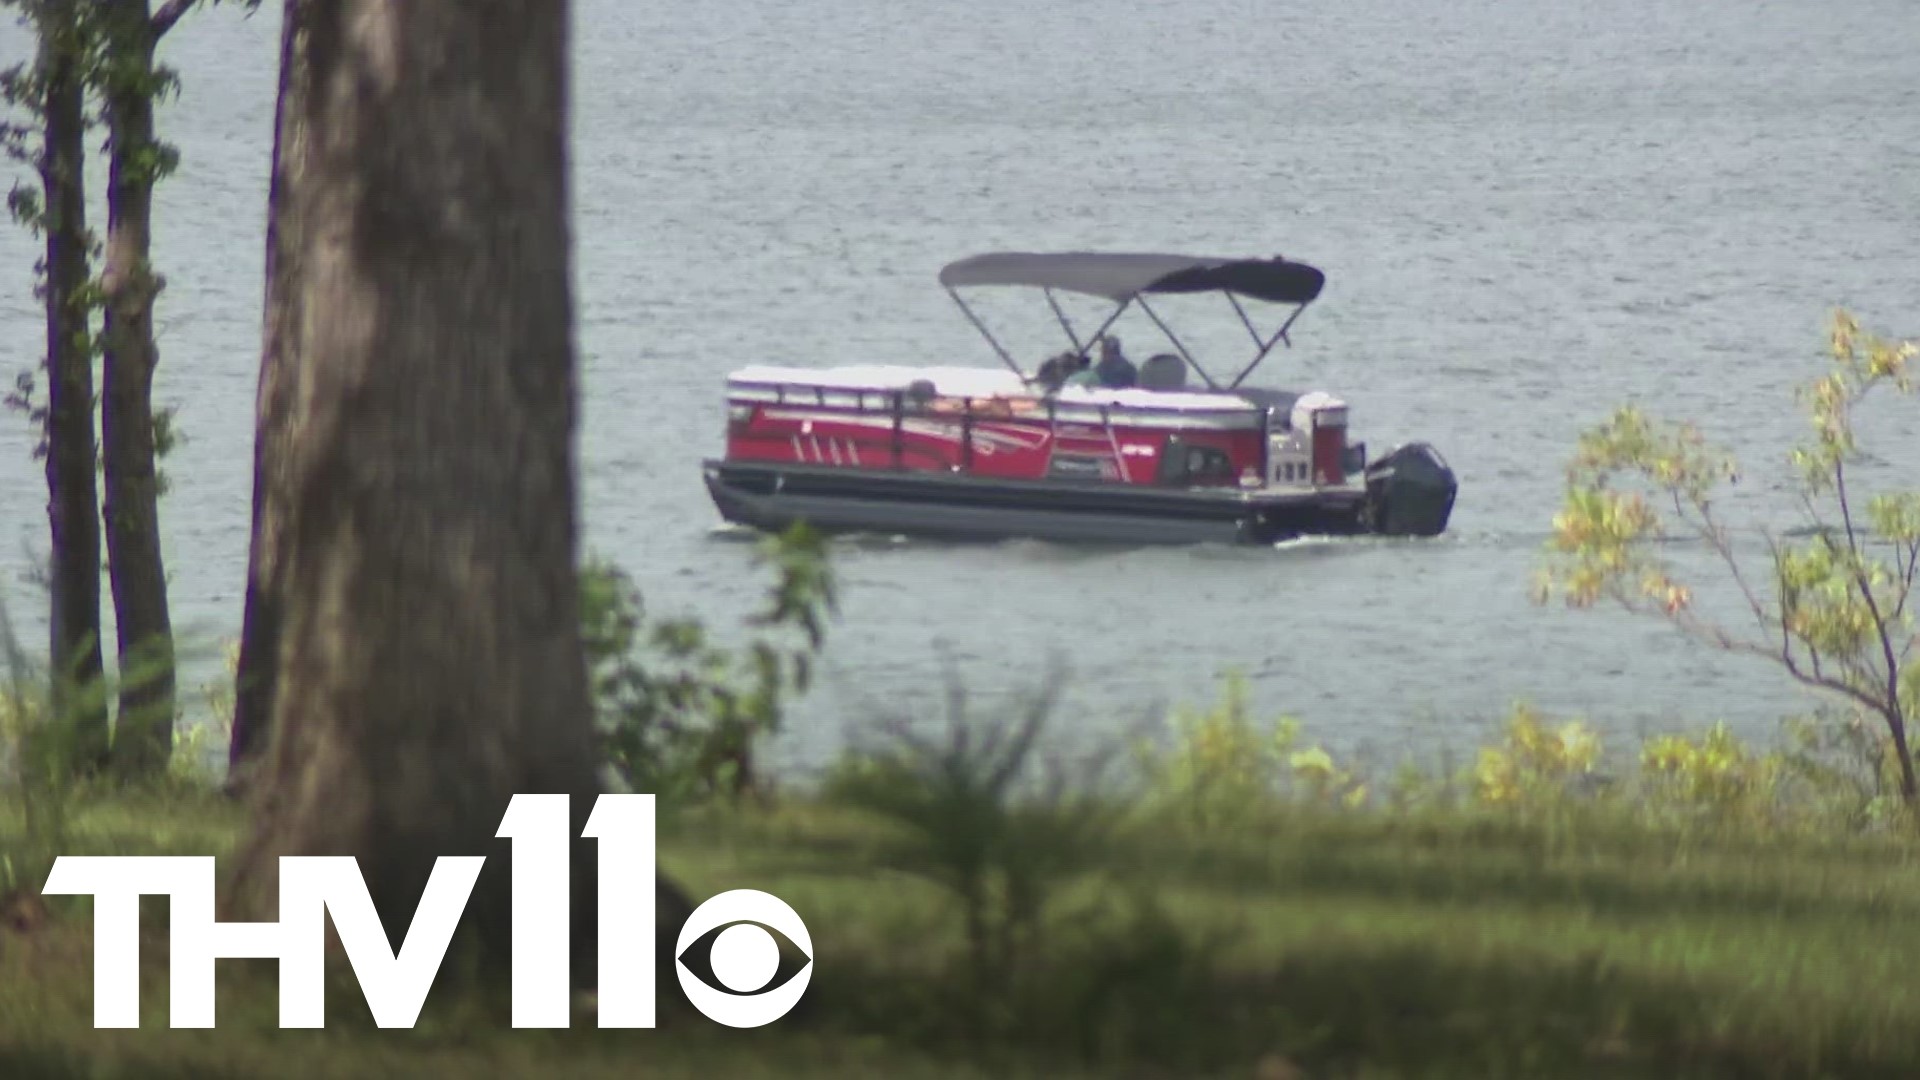 After a tragic weekend on Greers Ferry Lake where one person died in a boat crash, officials are now urging safety ahead of the Labor Day holiday.